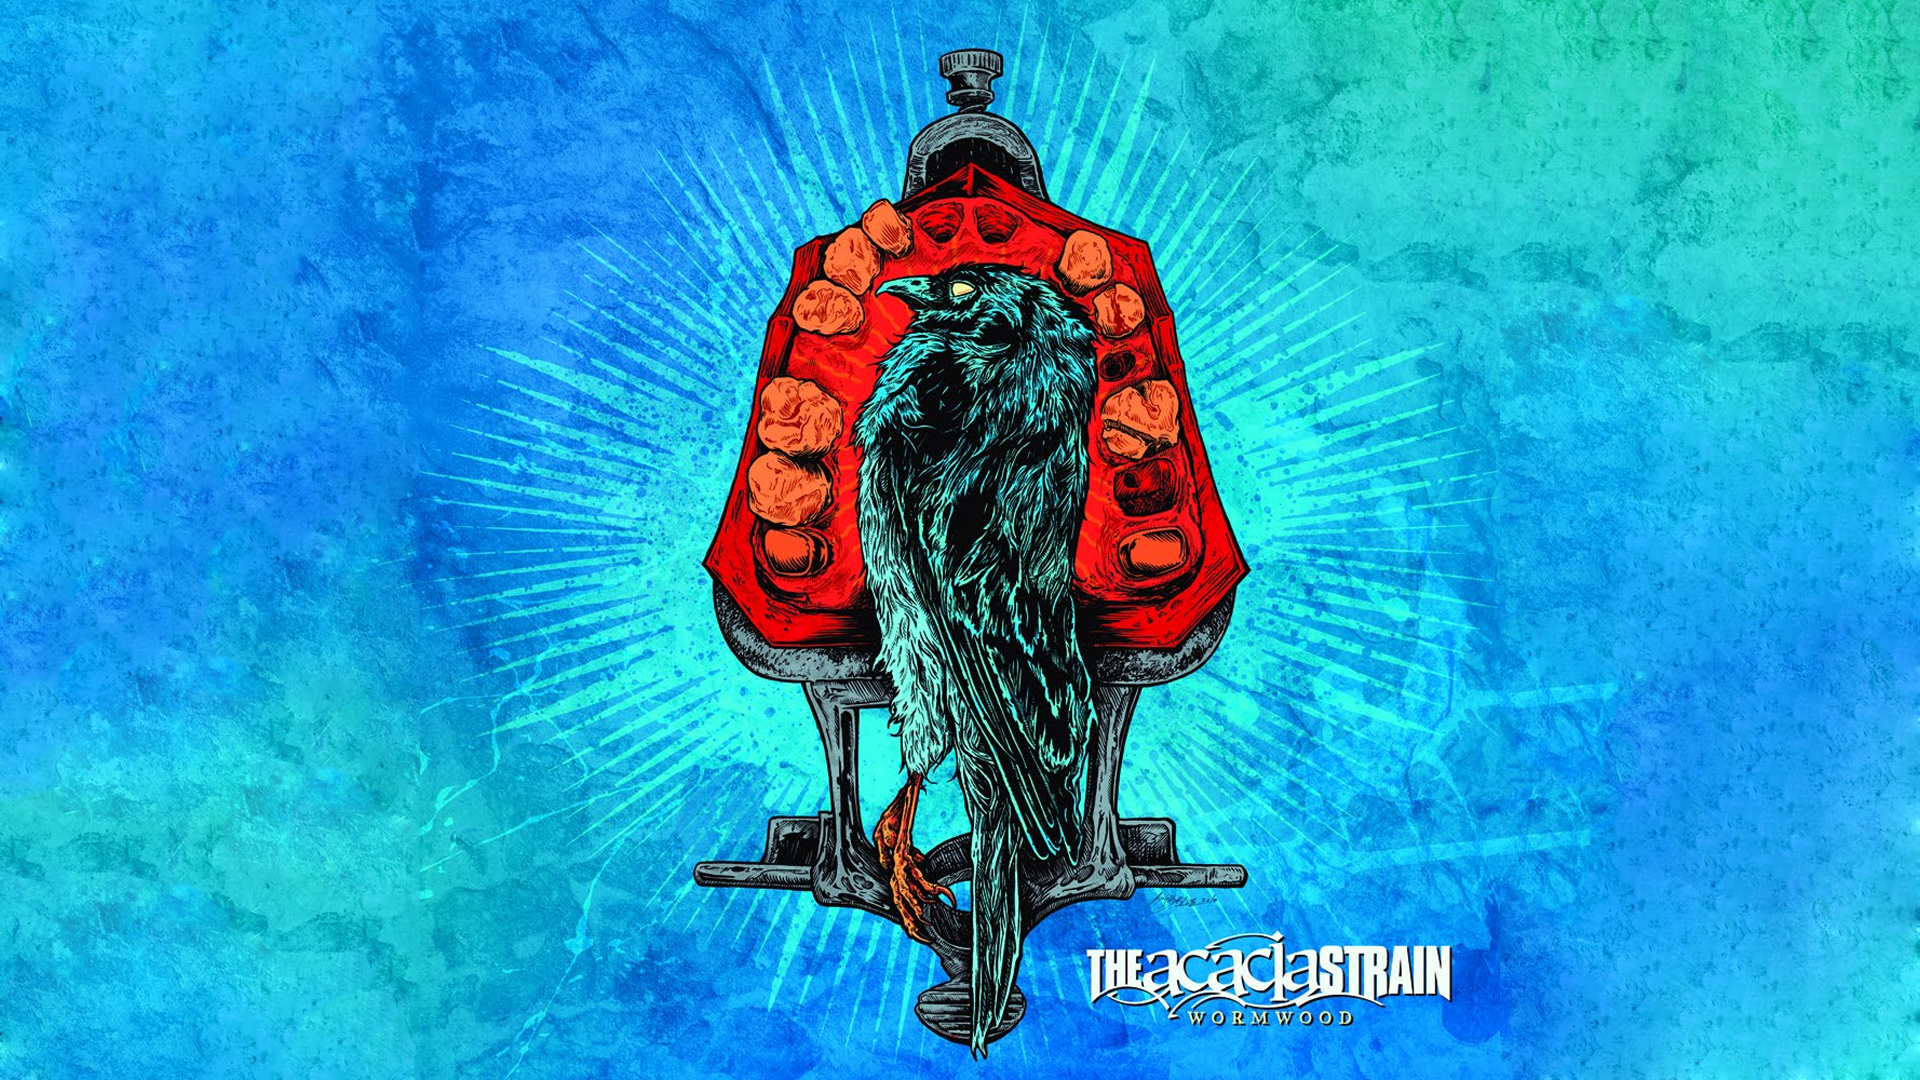 1 Acacia Strain HD Wallpapers | Backgrounds - Wallpaper Abyss